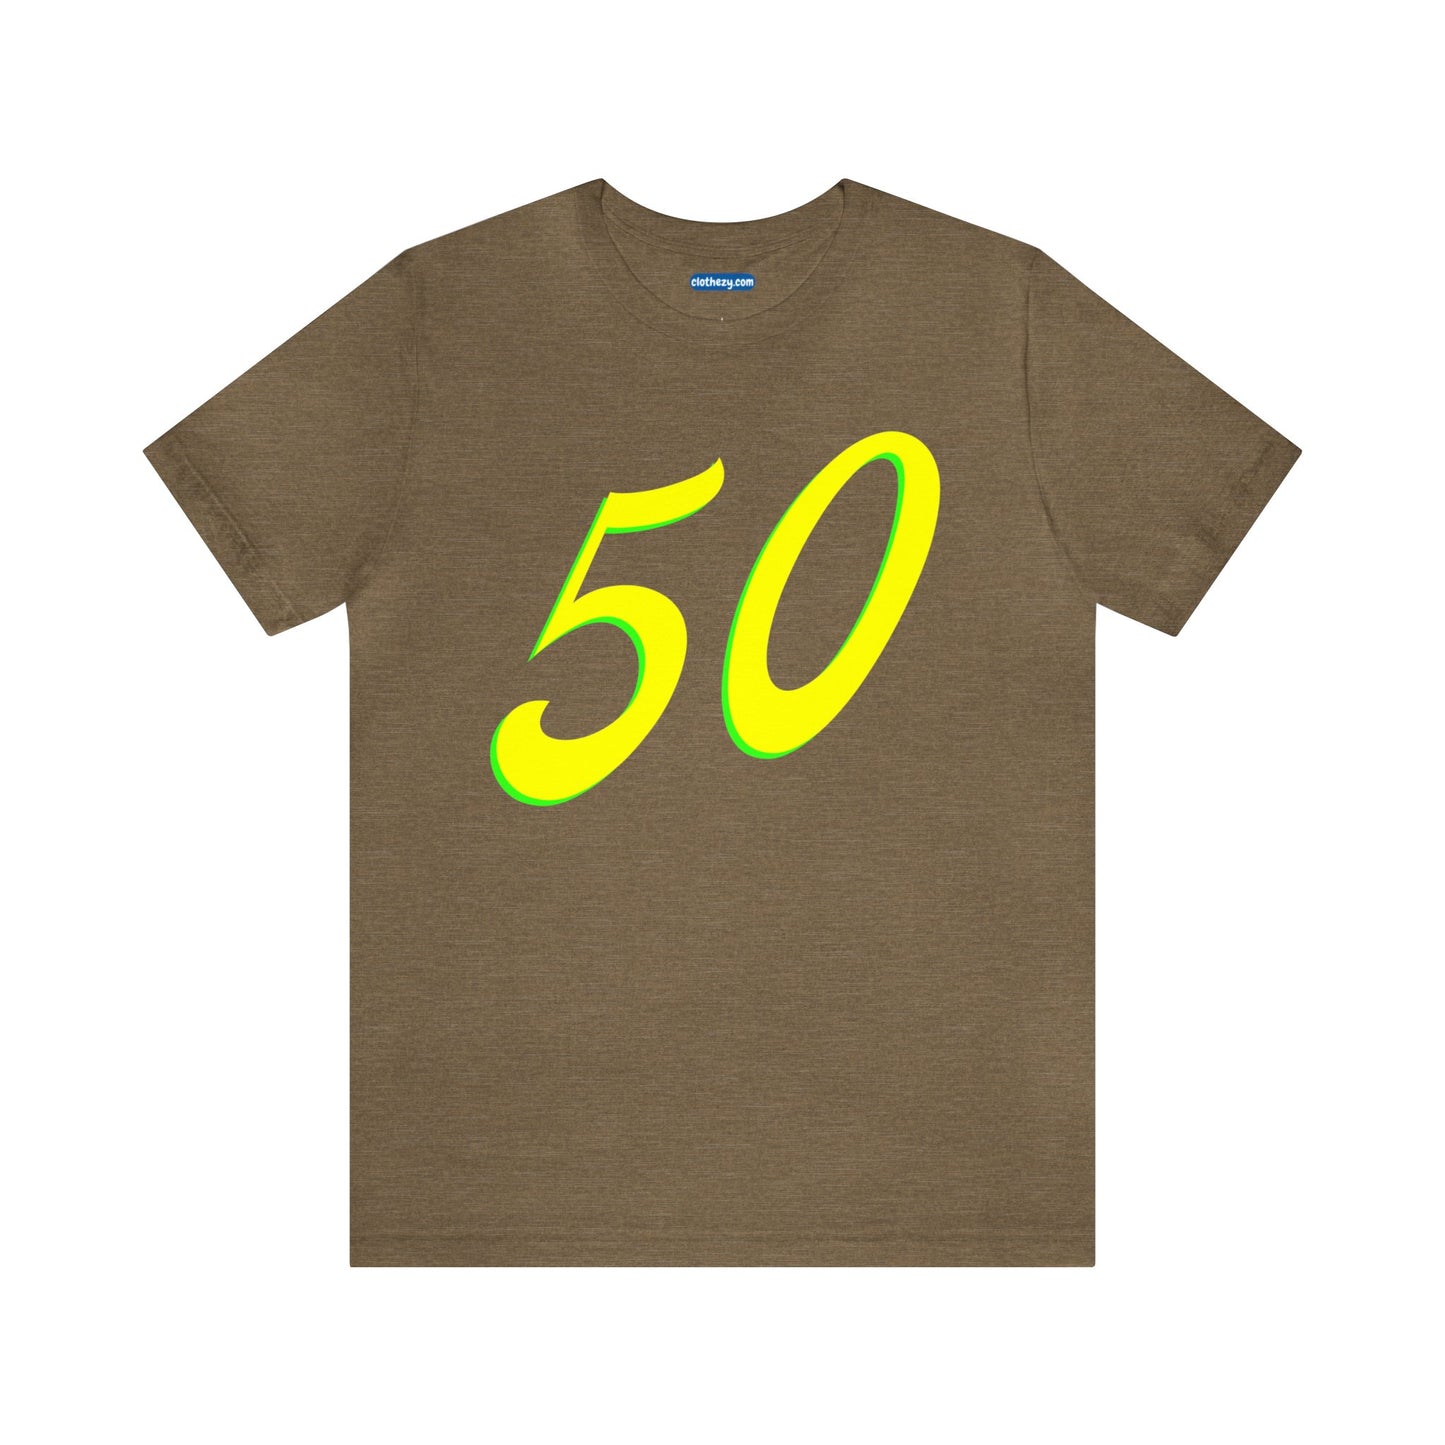 Number 50 Design - Soft Cotton Tee for birthdays and celebrations, Gift for friends and family, Multiple Options by clothezy.com in Olive Heather Size Small - Buy Now